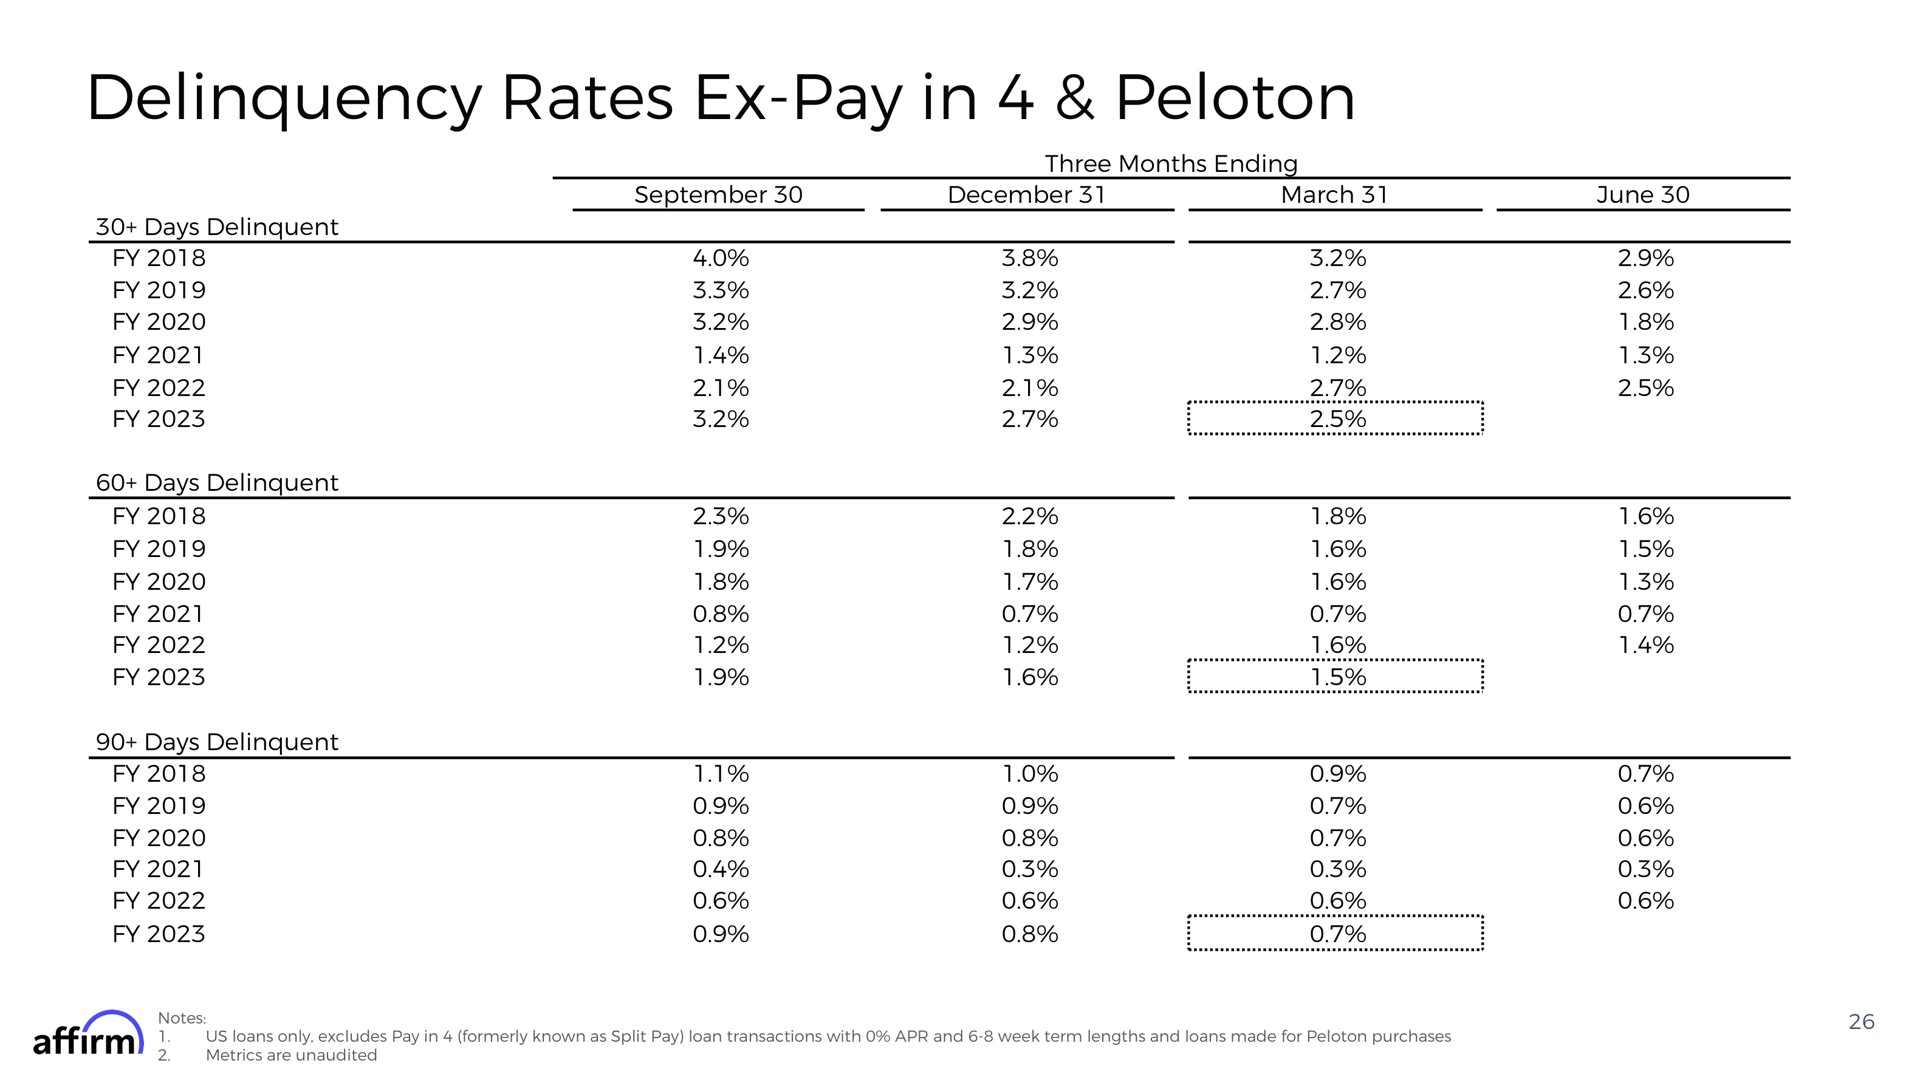 delinquency rates pay in peloton penned seen | Affirm